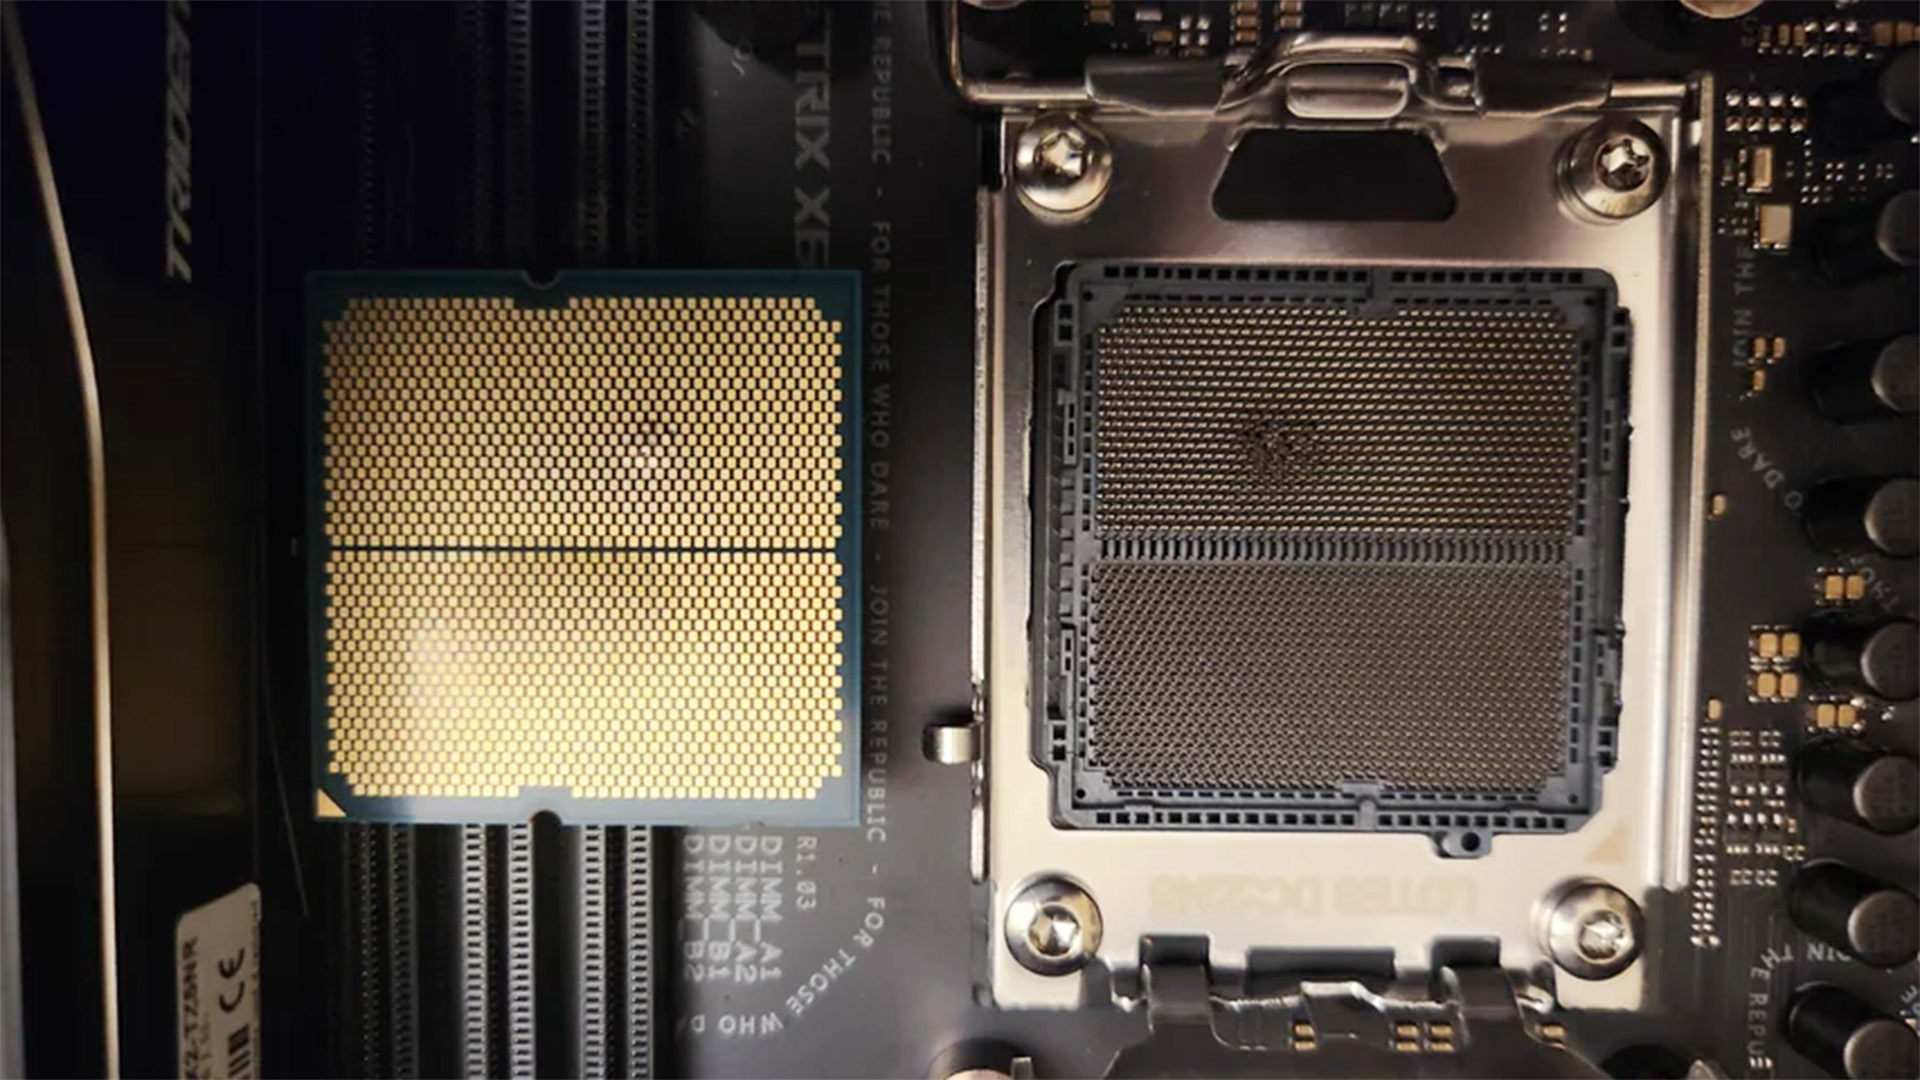 An AMD chip and AM5 motherboard socket with visible damage